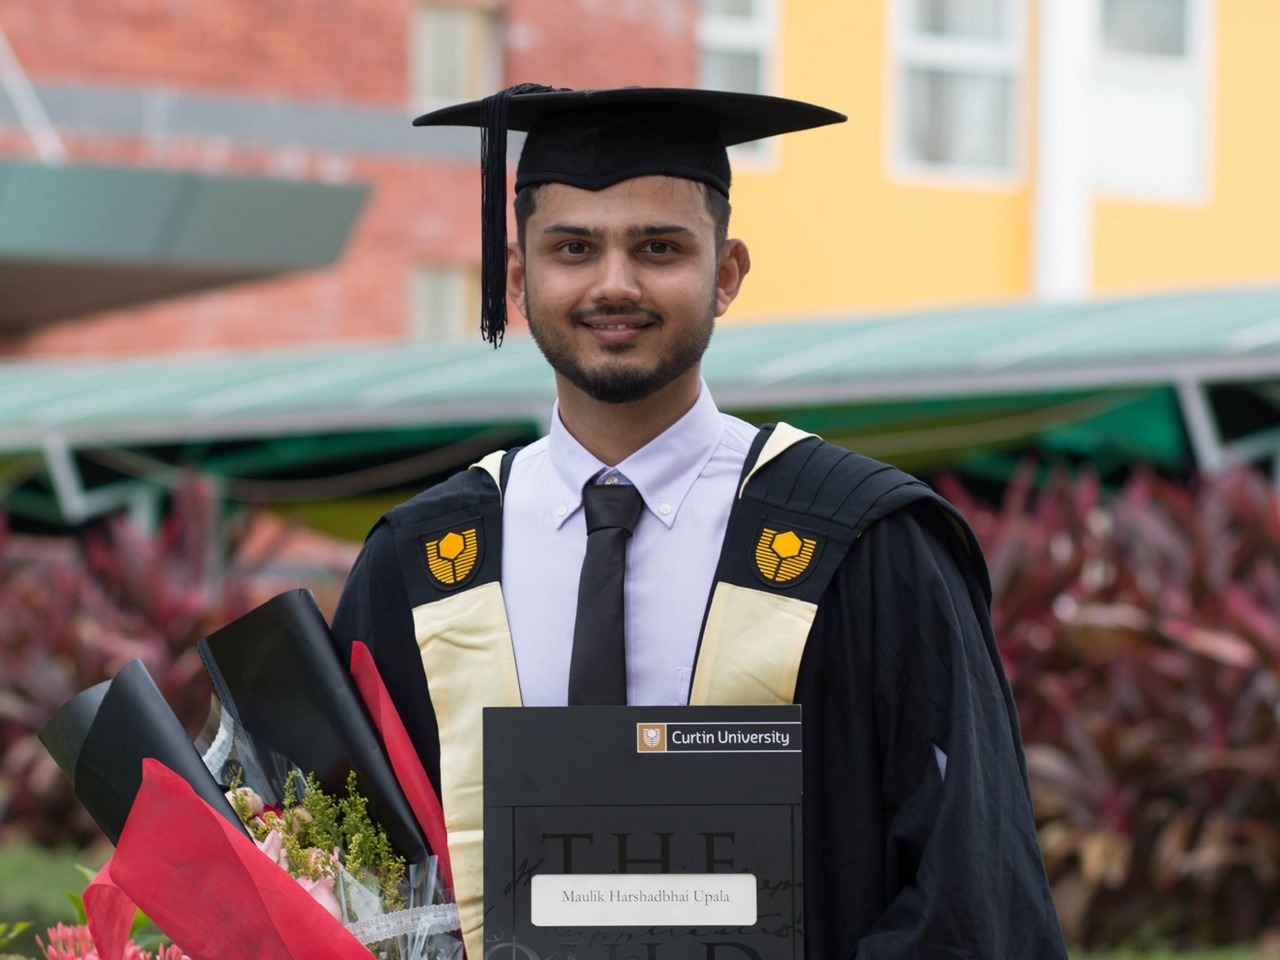 “I chose to attend Curtin Malaysia because it offers Curtin’s well-structured Computer System and Networking programme. I acquired considerable technical knowledge and skills that allow me to actively contribute to the growth and success of my...